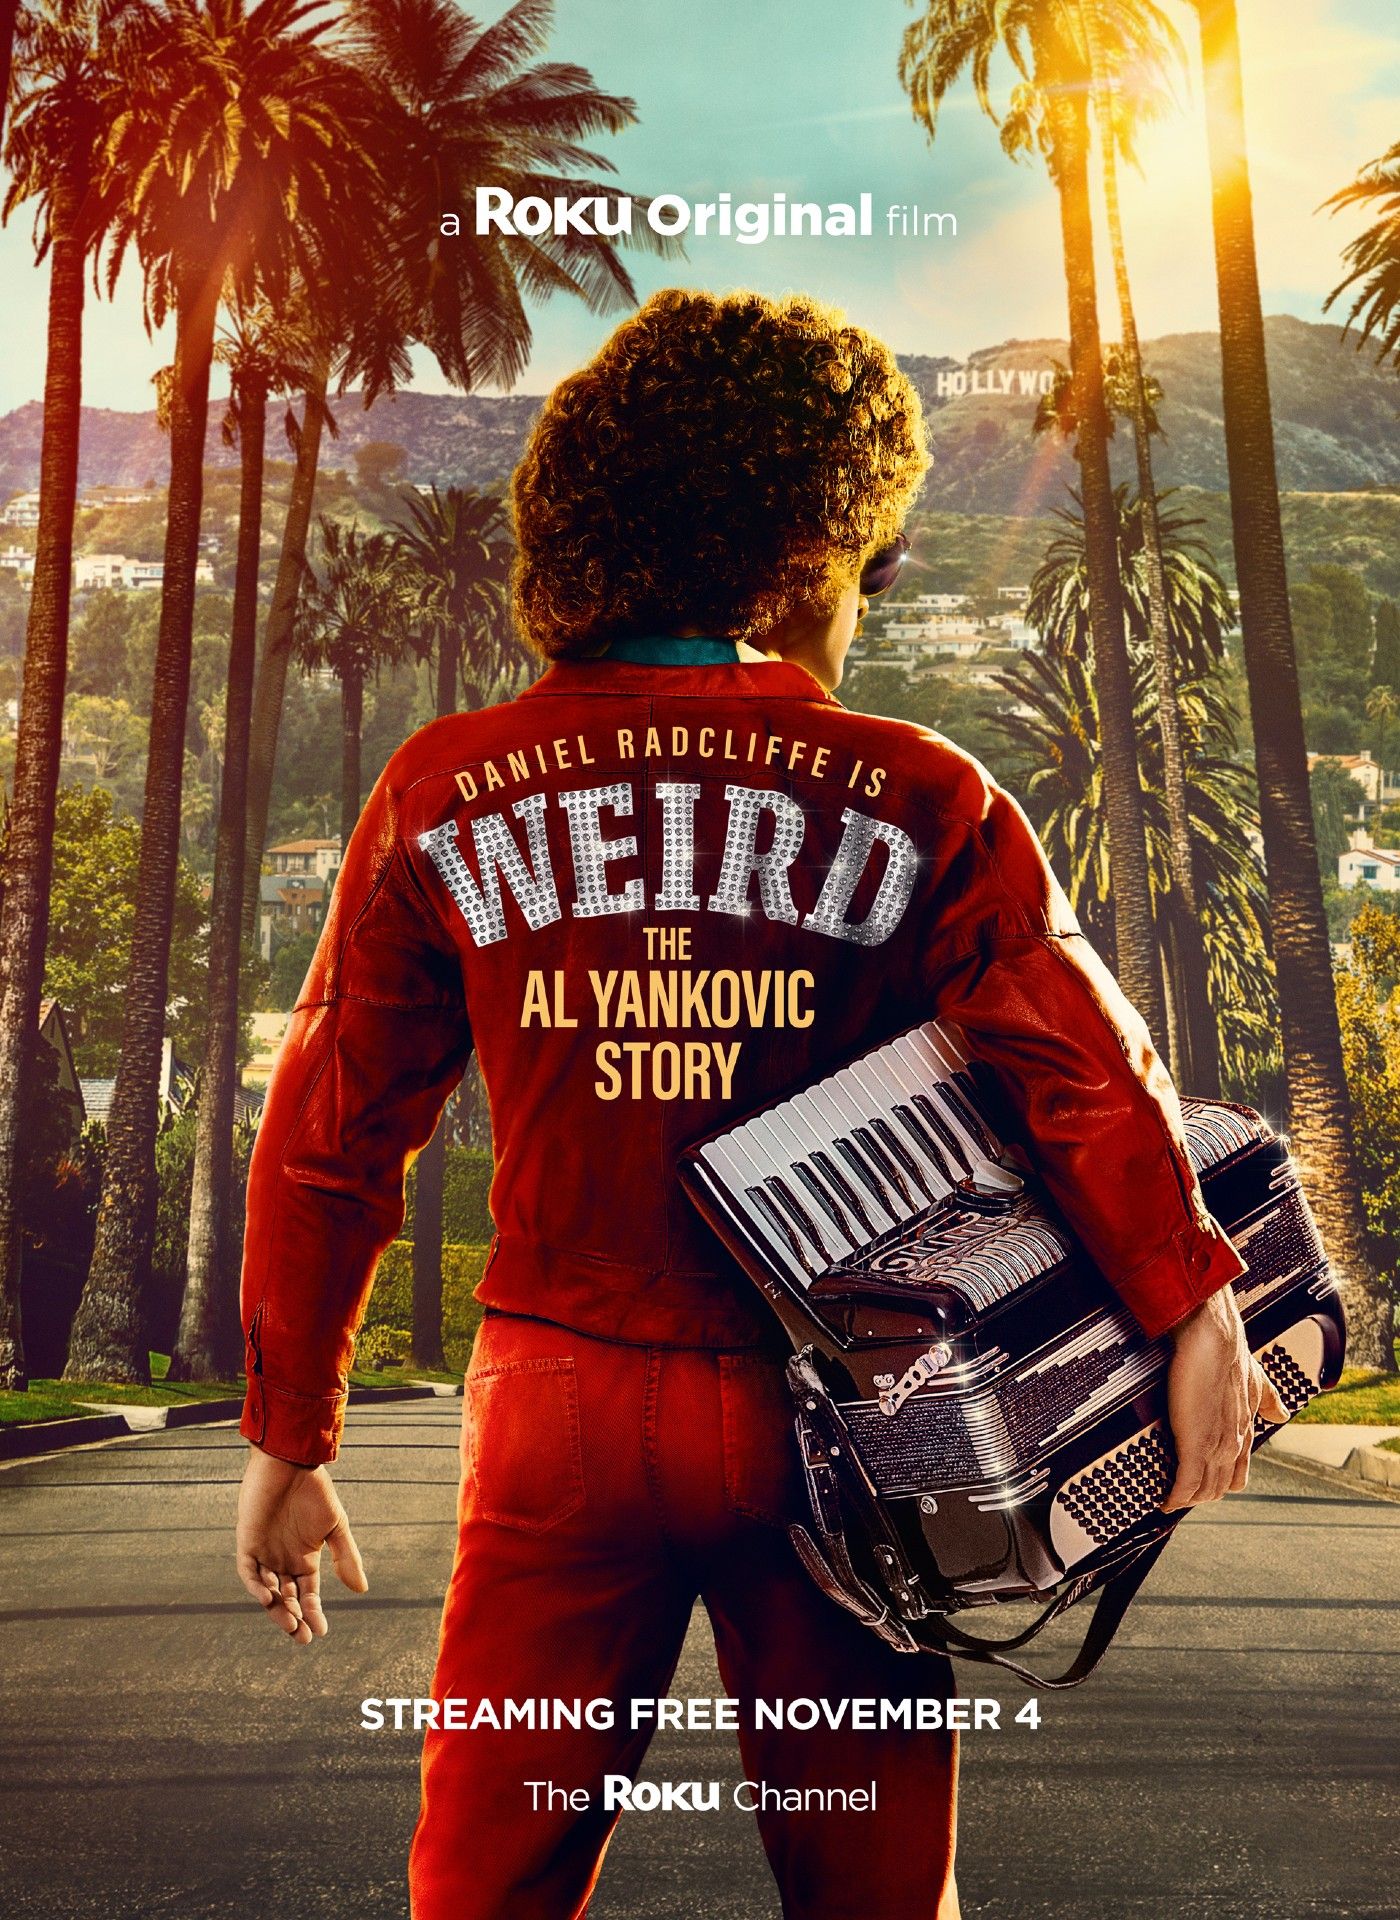 Weird The Al Yankovic Story official poster